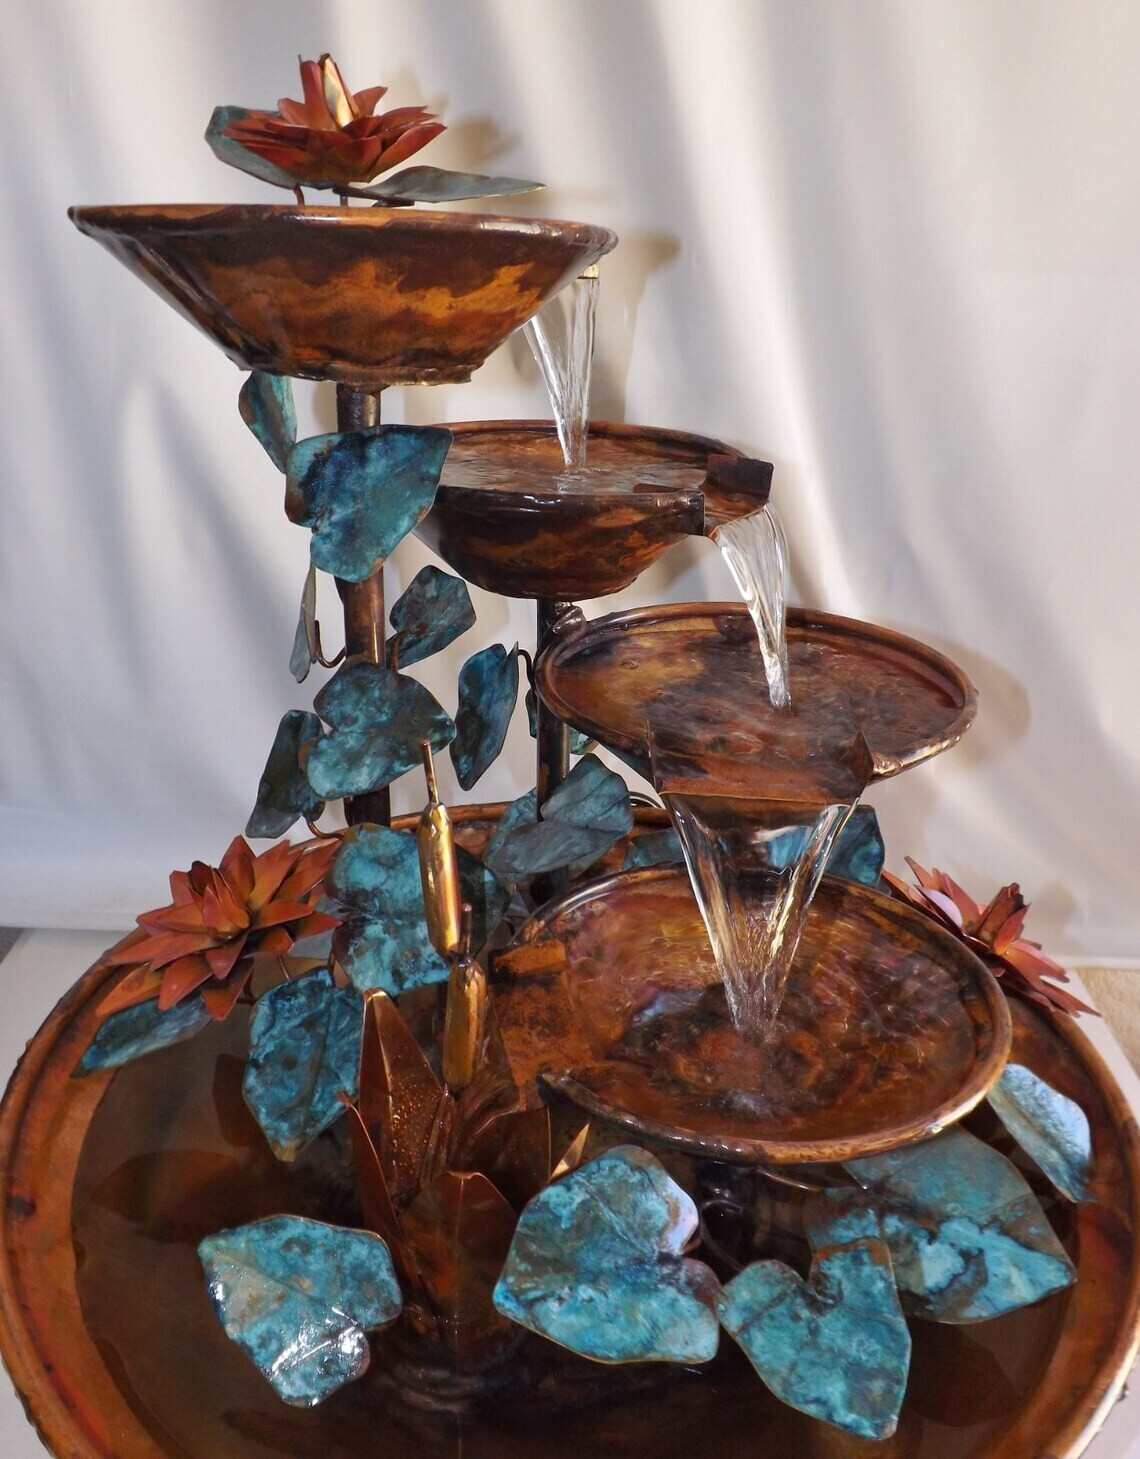 4 Tier Large Copper Waterfall Fountain w/ Cattails, Ivy Leaves, Water Lilies (available by order, please see details for shipping/inventory)